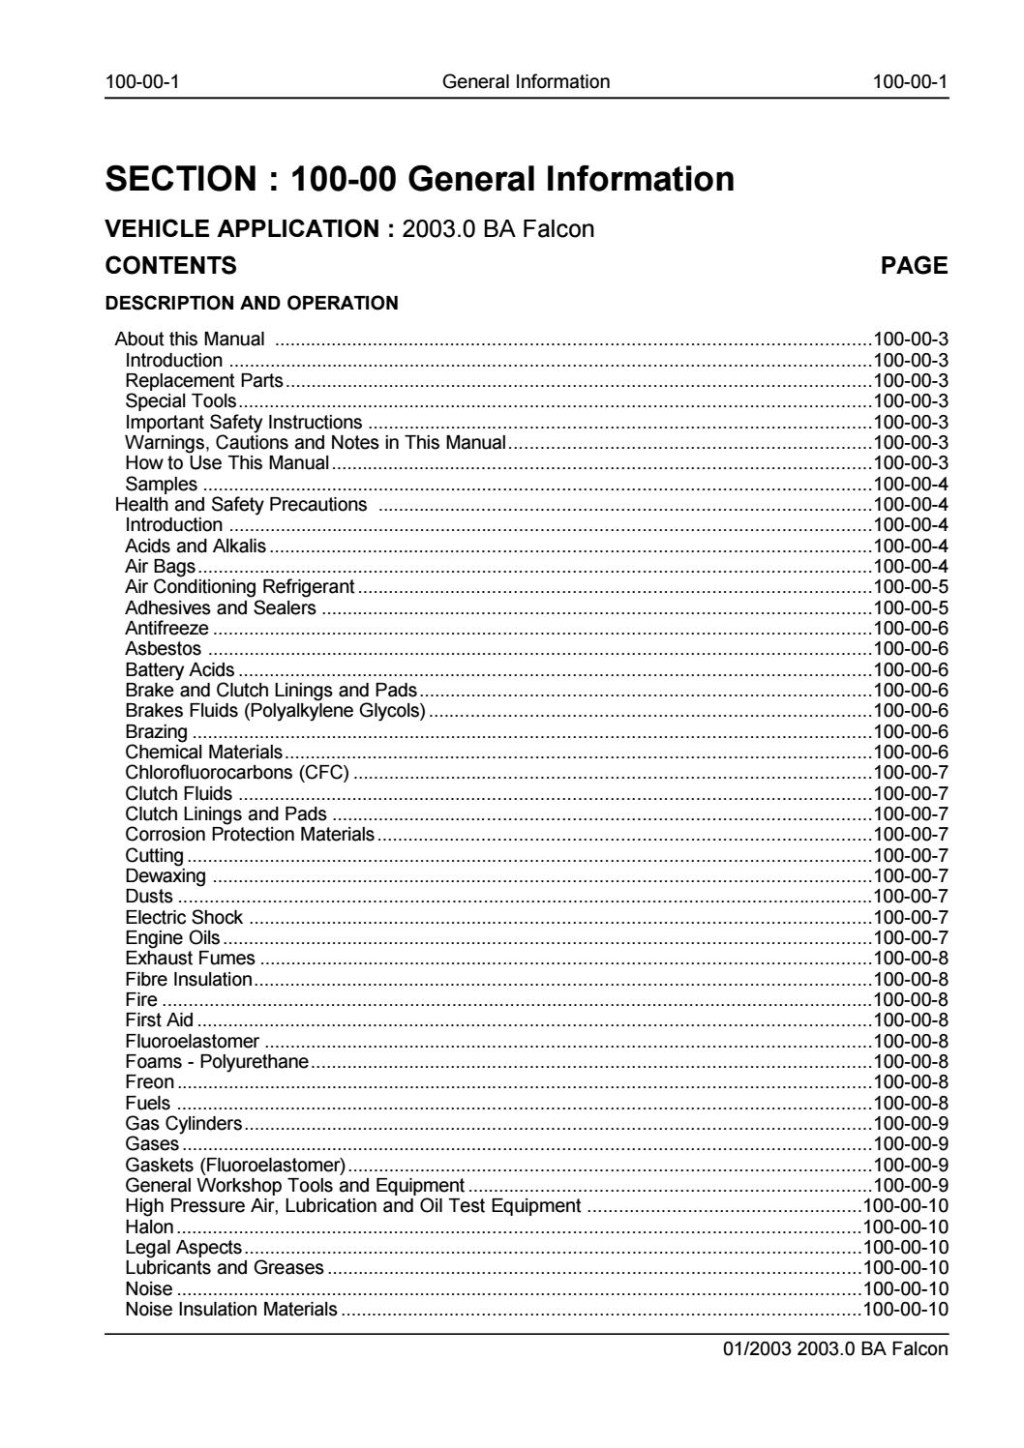 Picture of: FORD BA FALCON Service Repair Manual by  – Issuu